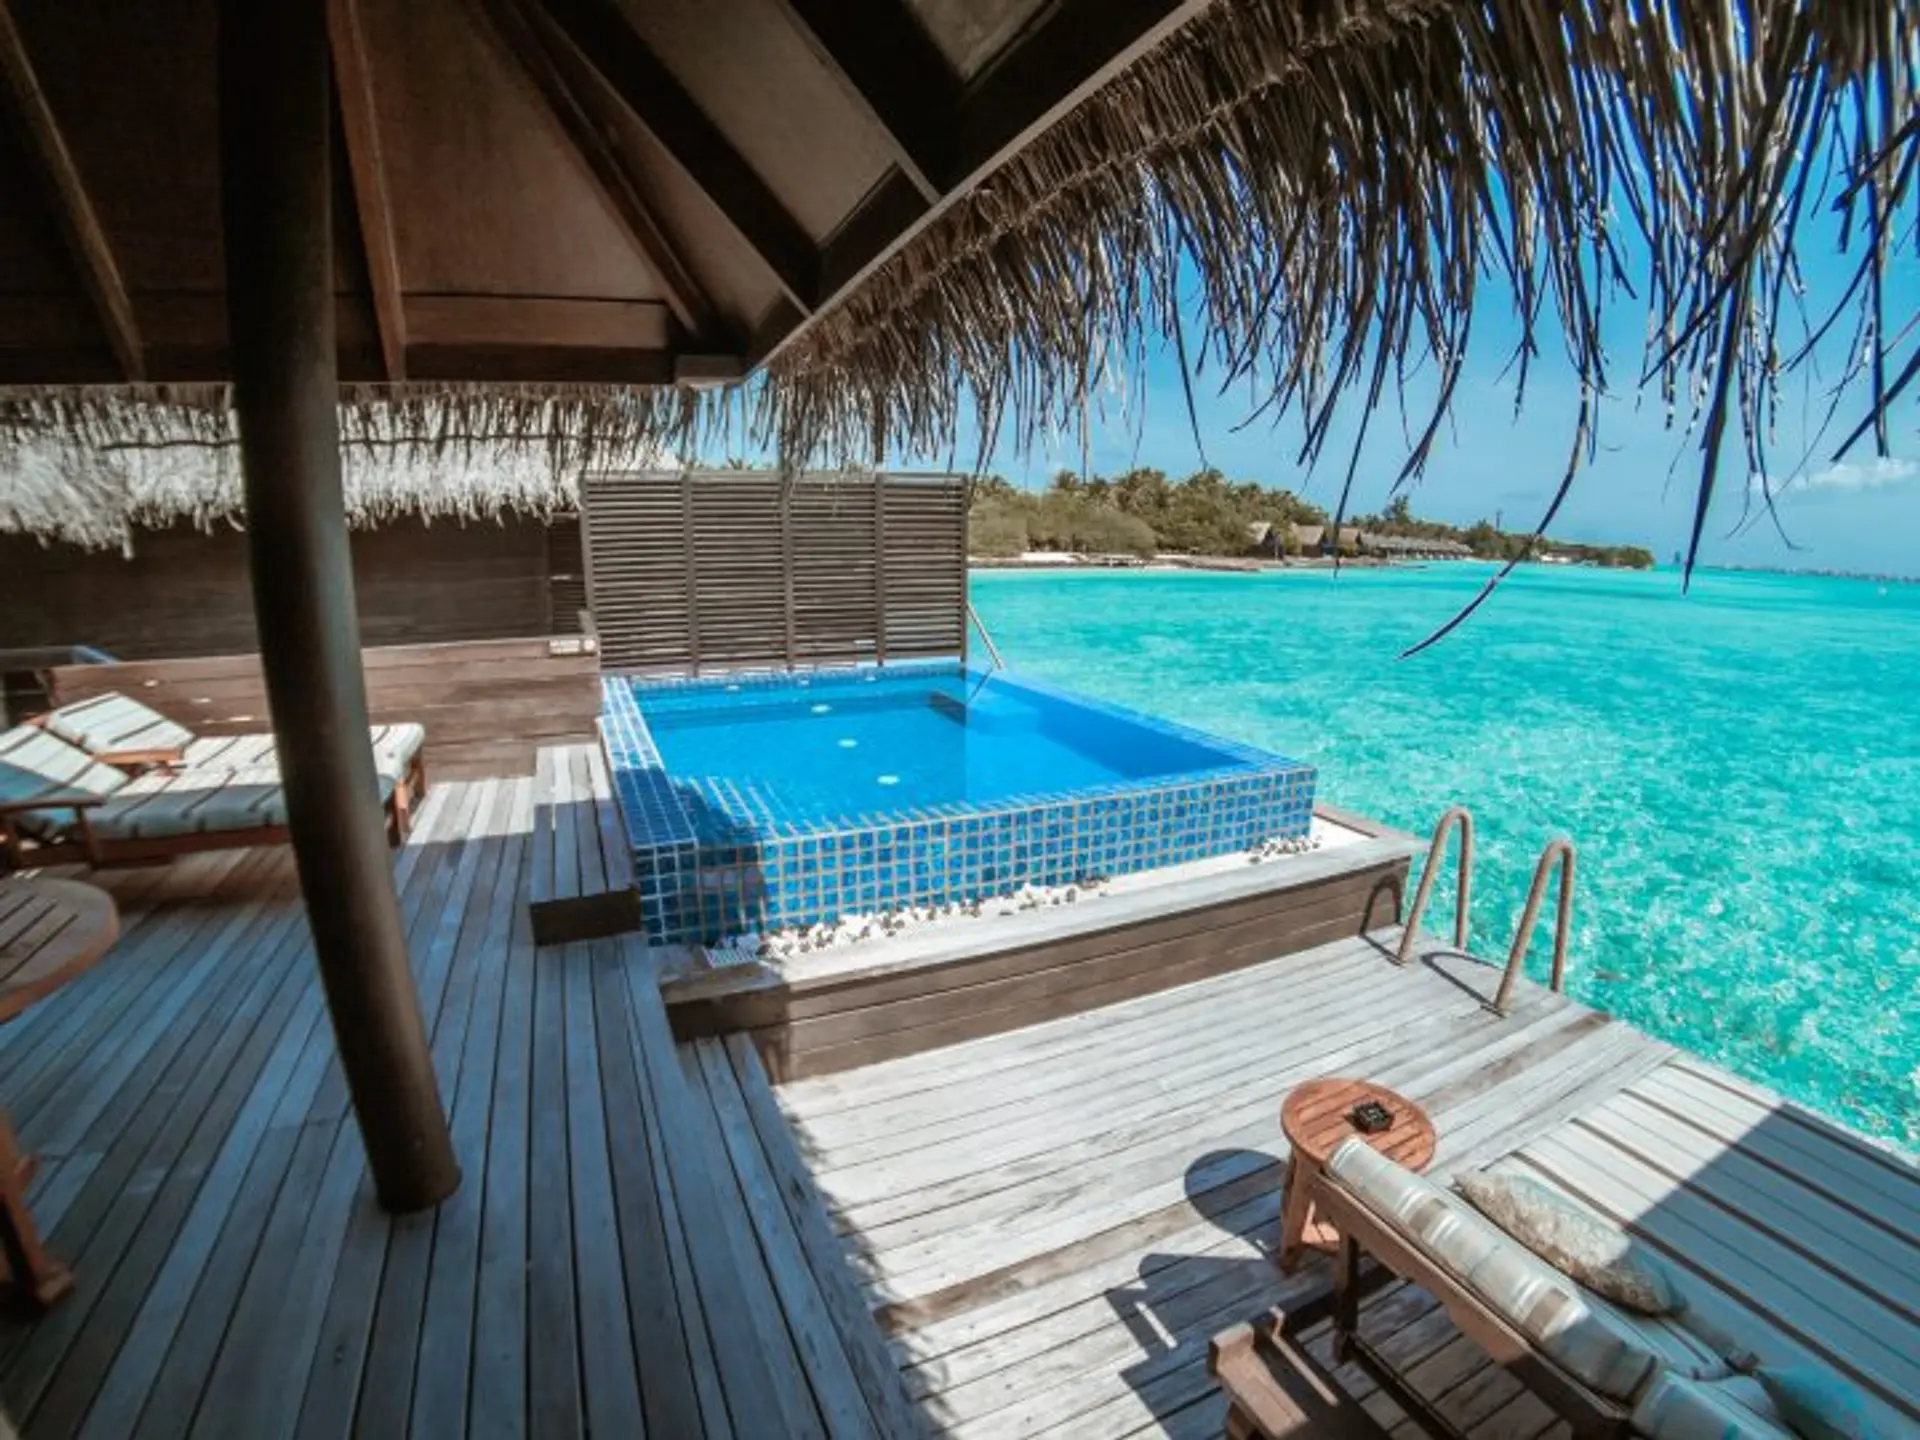 Destinations News - The Maldives will be the first country in the world to launch a loyalty programme